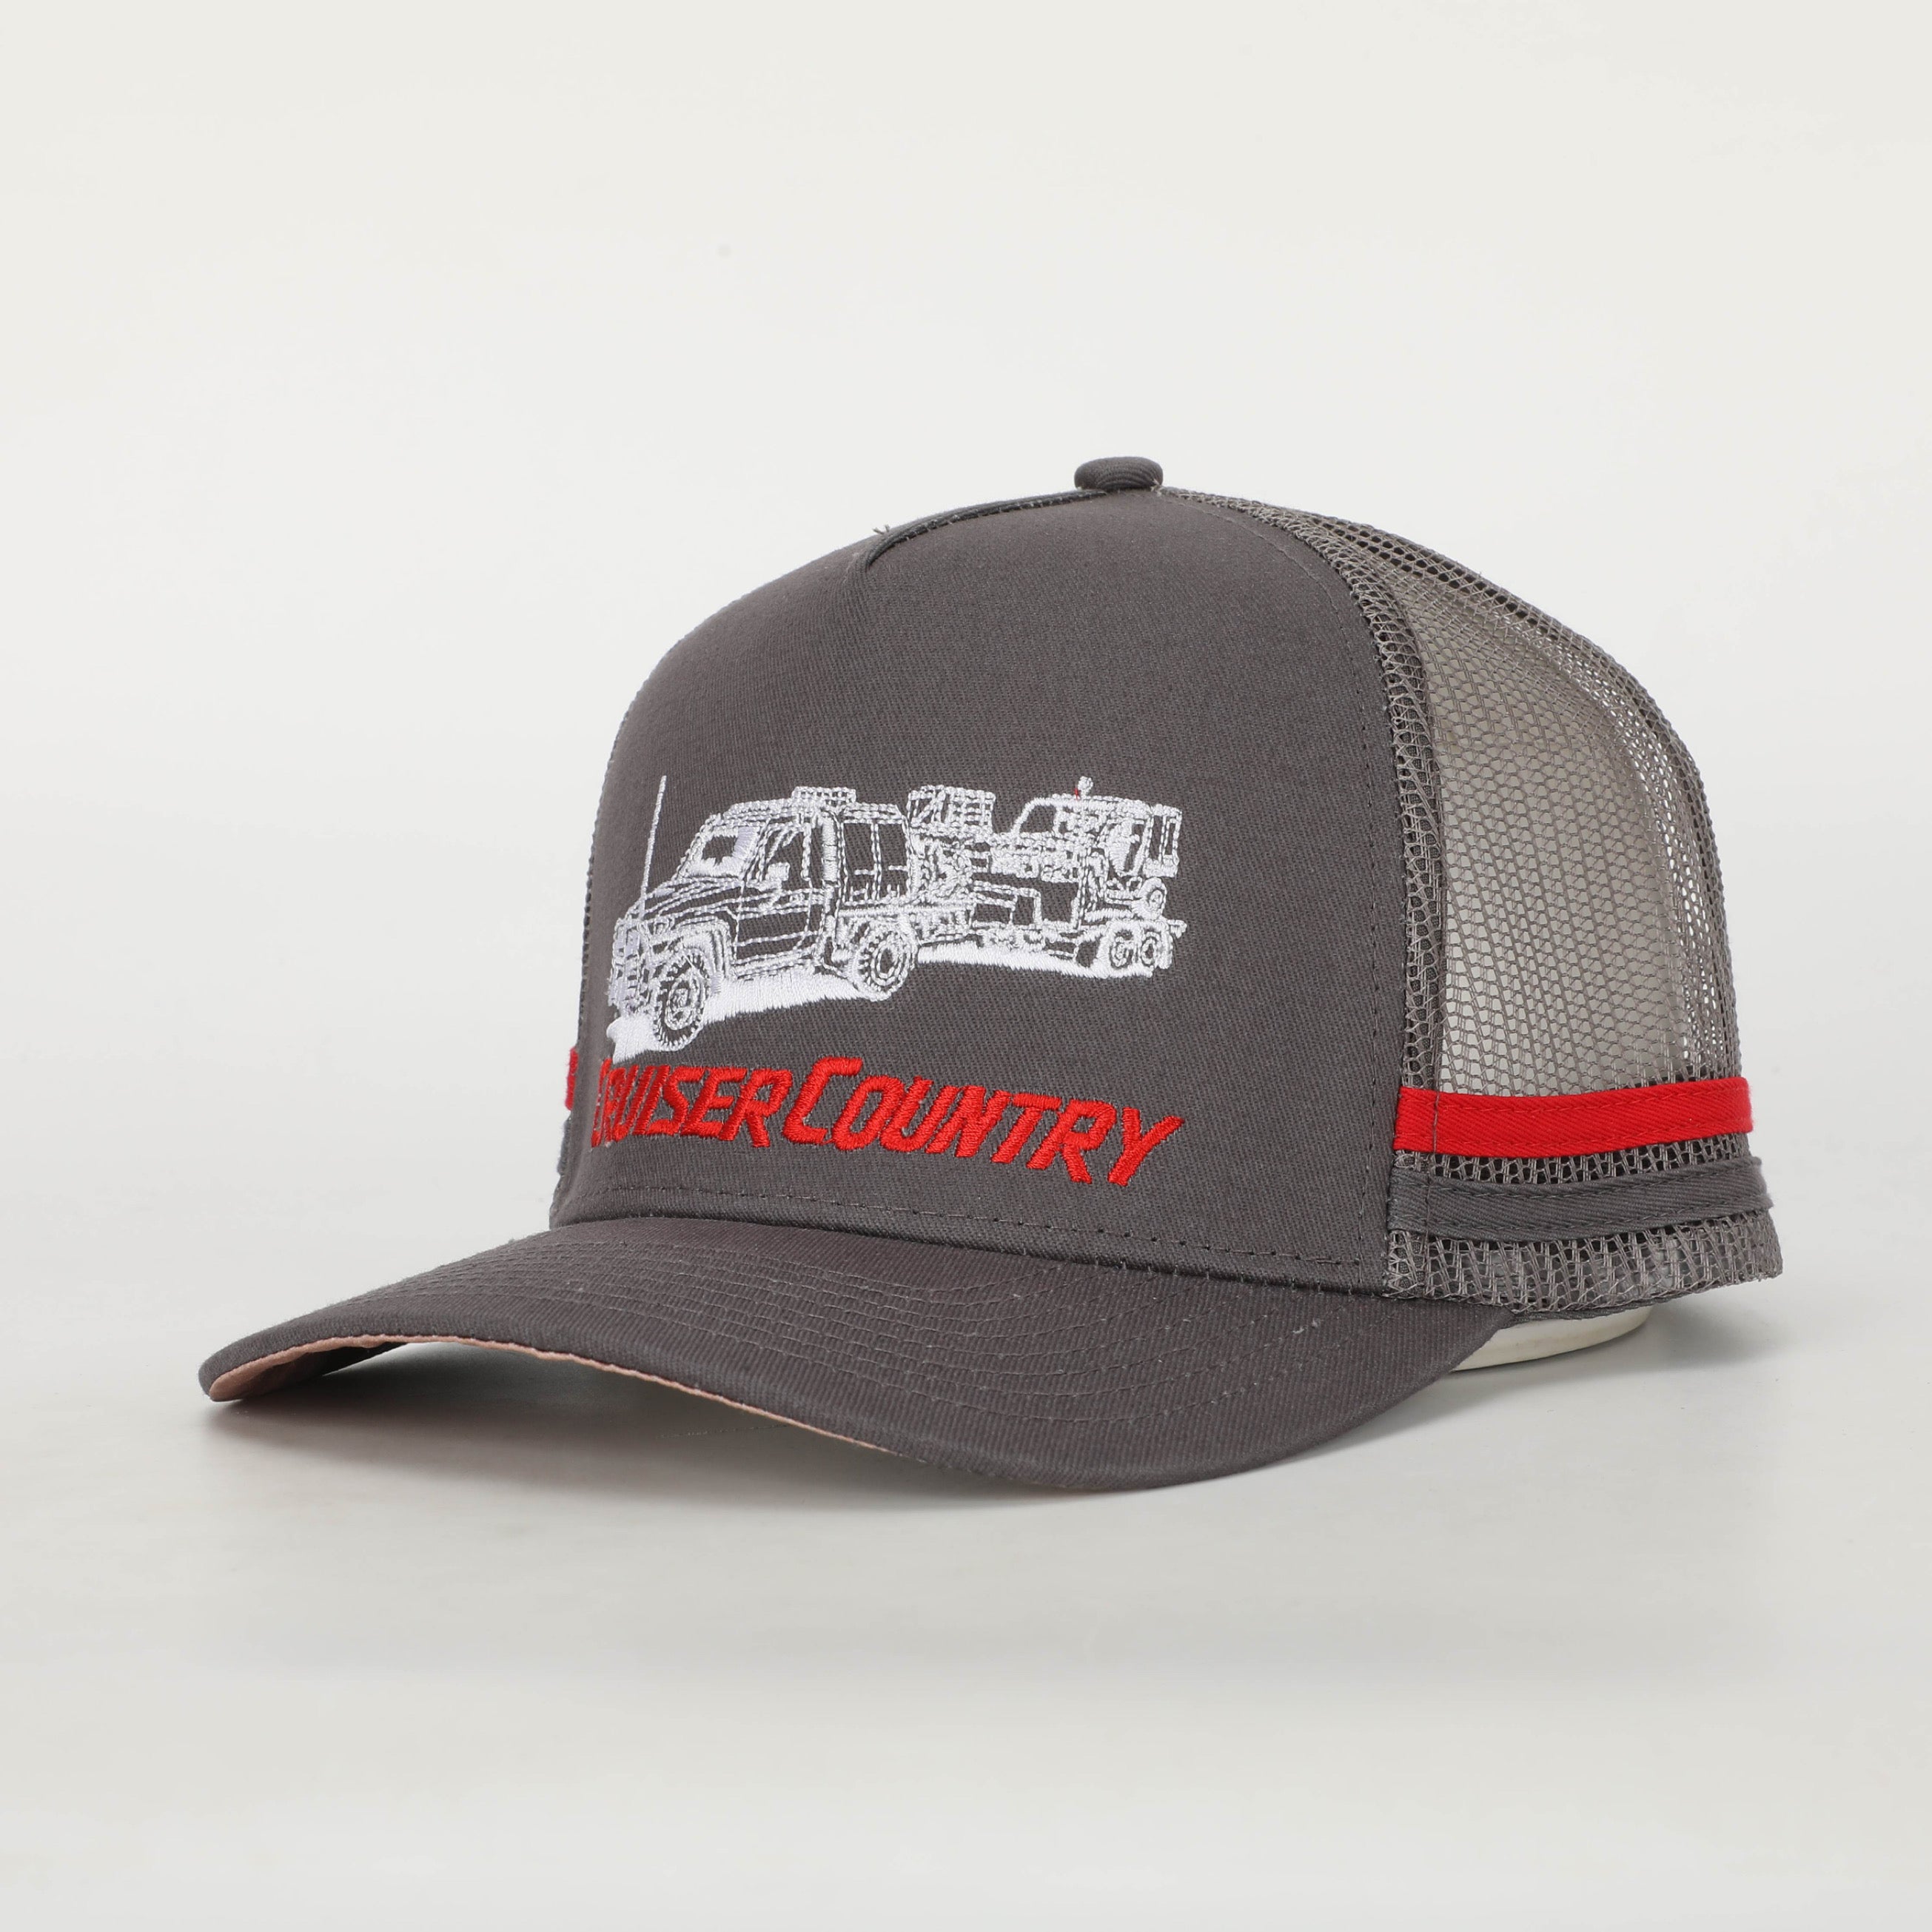 Cruiser Country - Truckers Hat Grey - Hogs Dogs Quads Shop